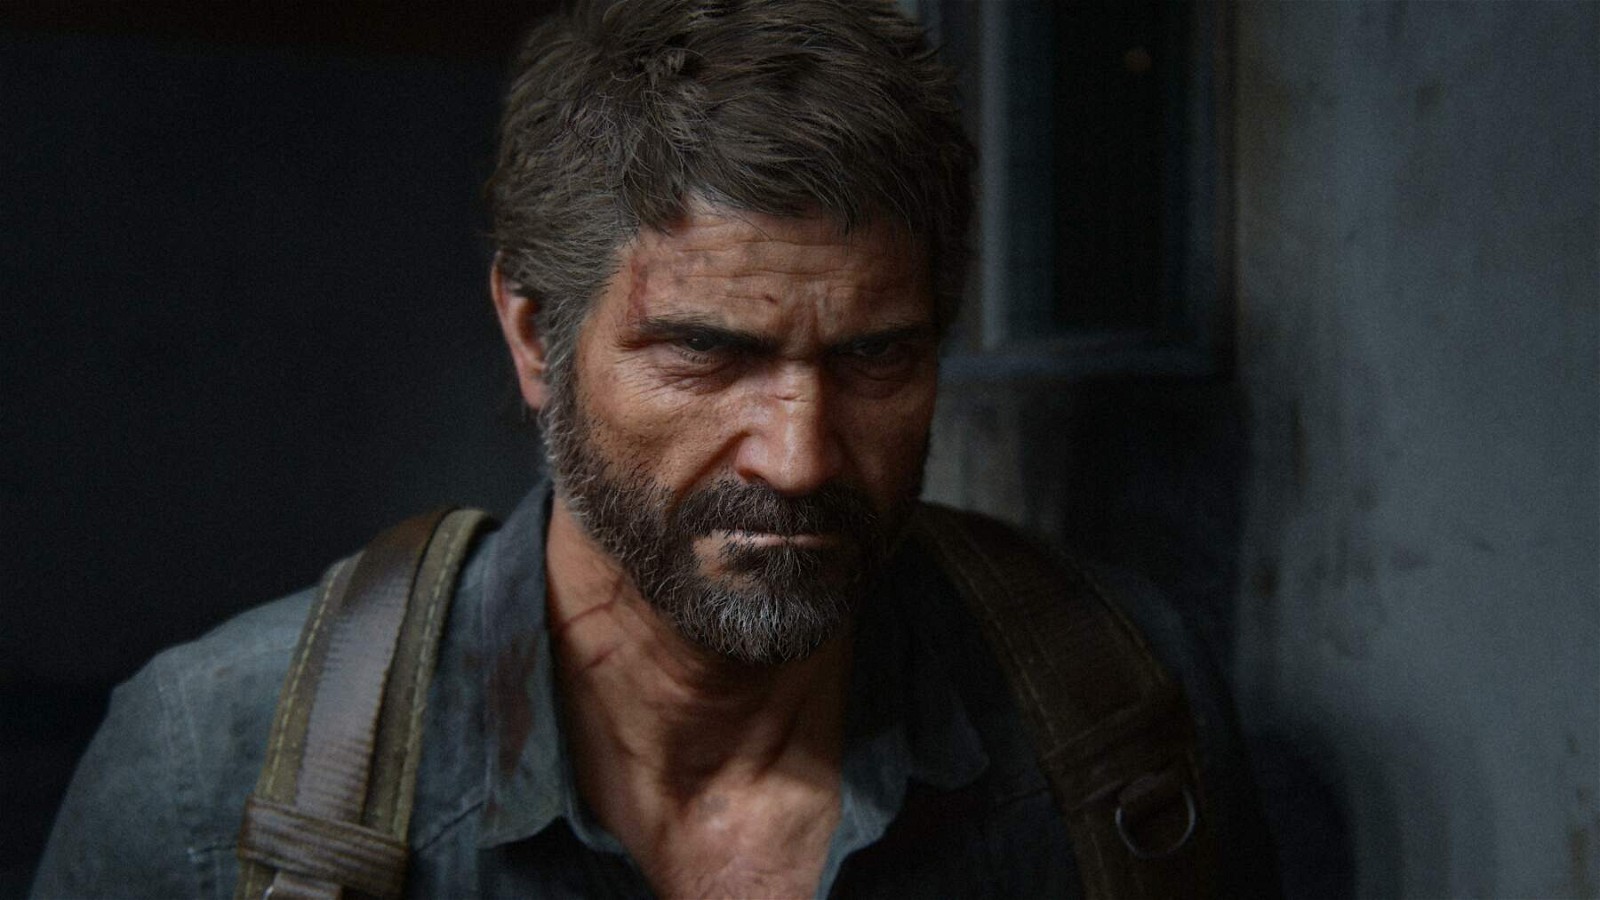 Joel's character in the last of us video game